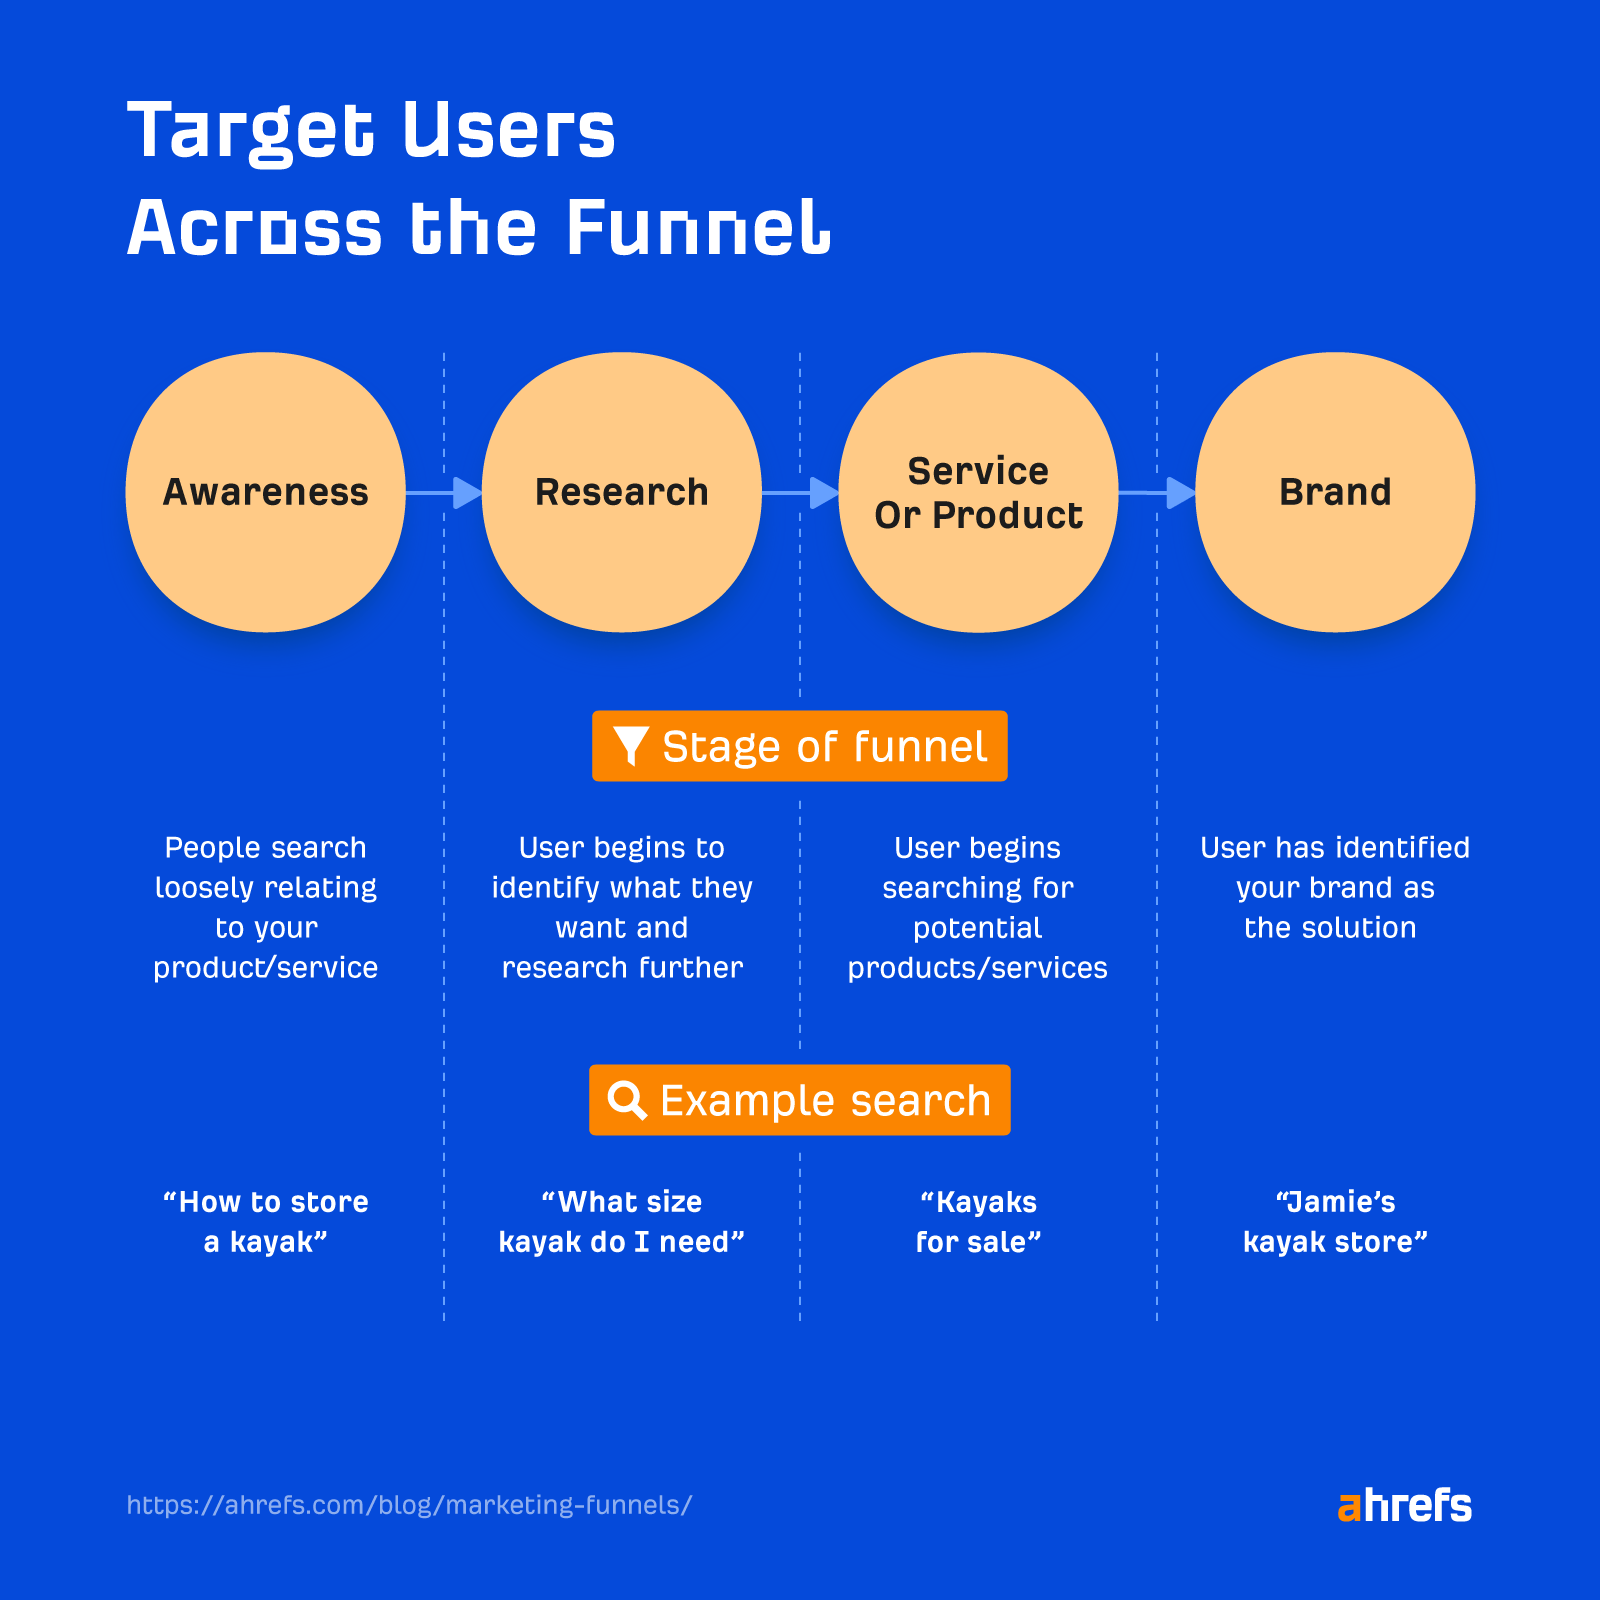 Targeting users across the stages of the funnel